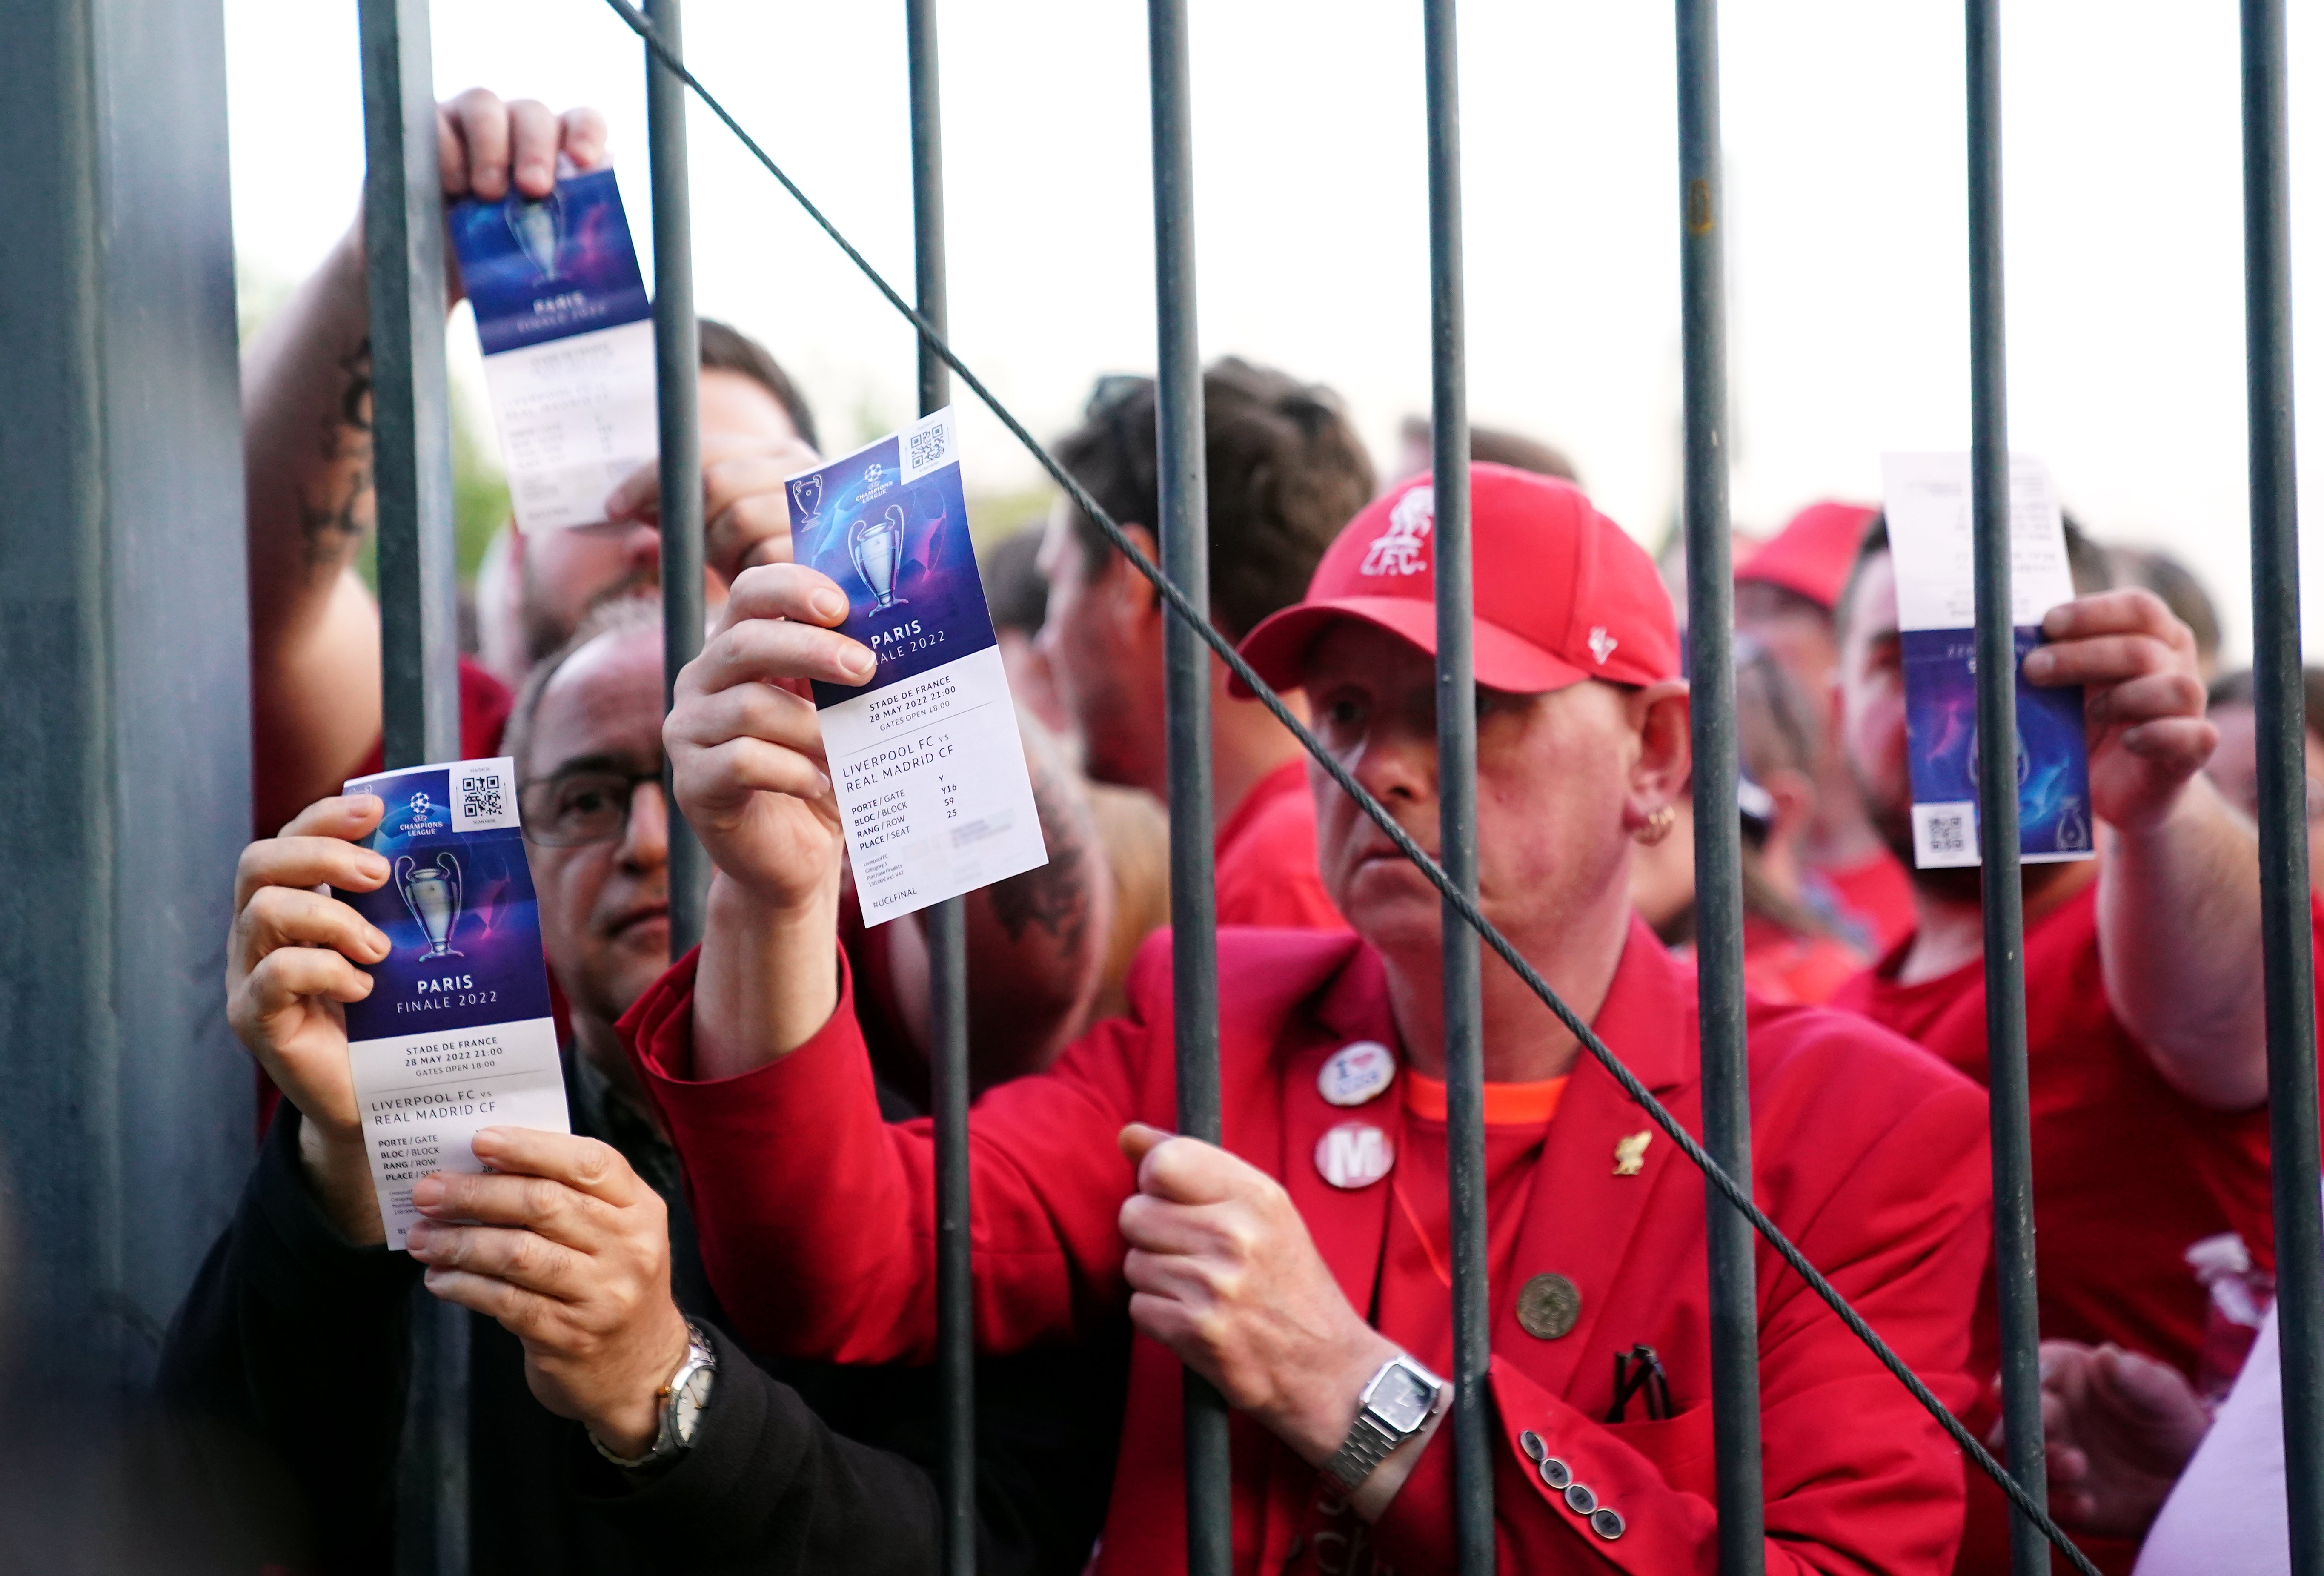 Liverpool fans with tickets for the Champions League final could not gain access to the Stade de France.